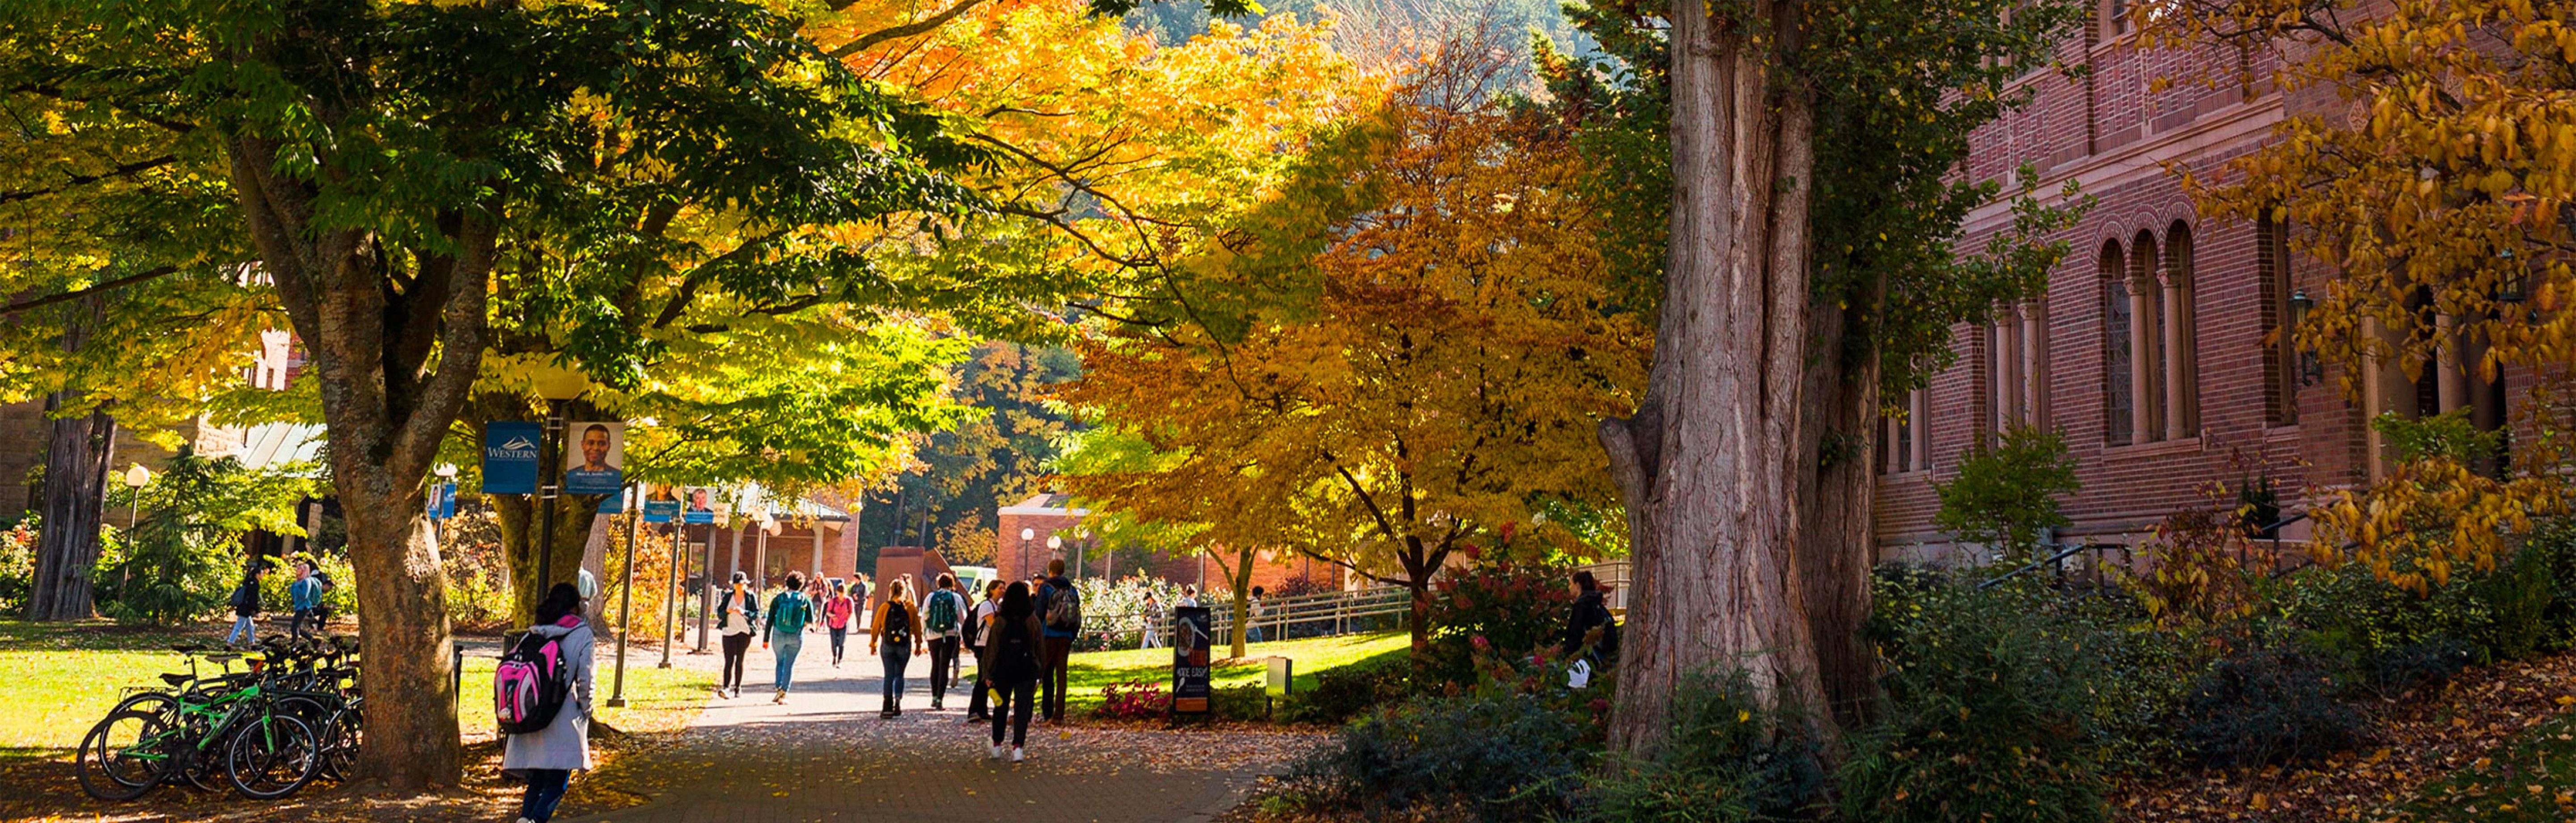 Sunny autumn day on WWU's North Campus near Wilson Library